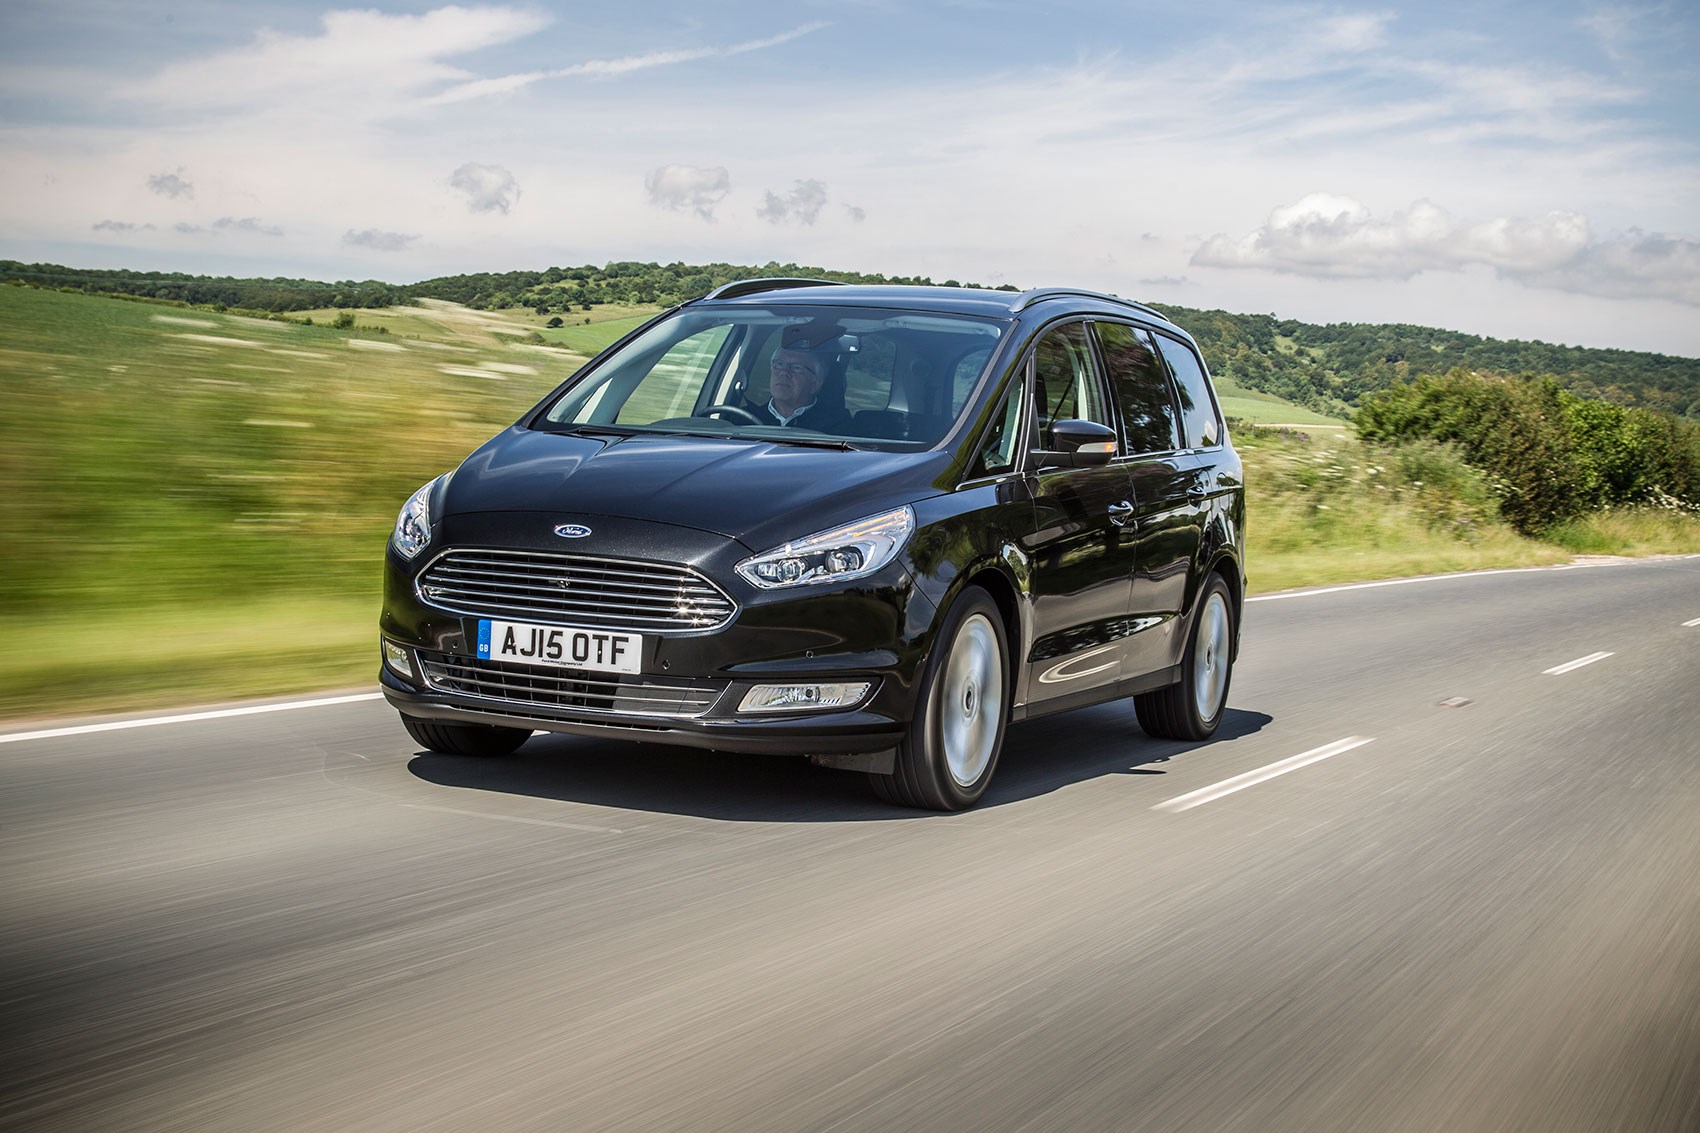 Ford Galaxy 2.0 TDCi 180 (2015) review